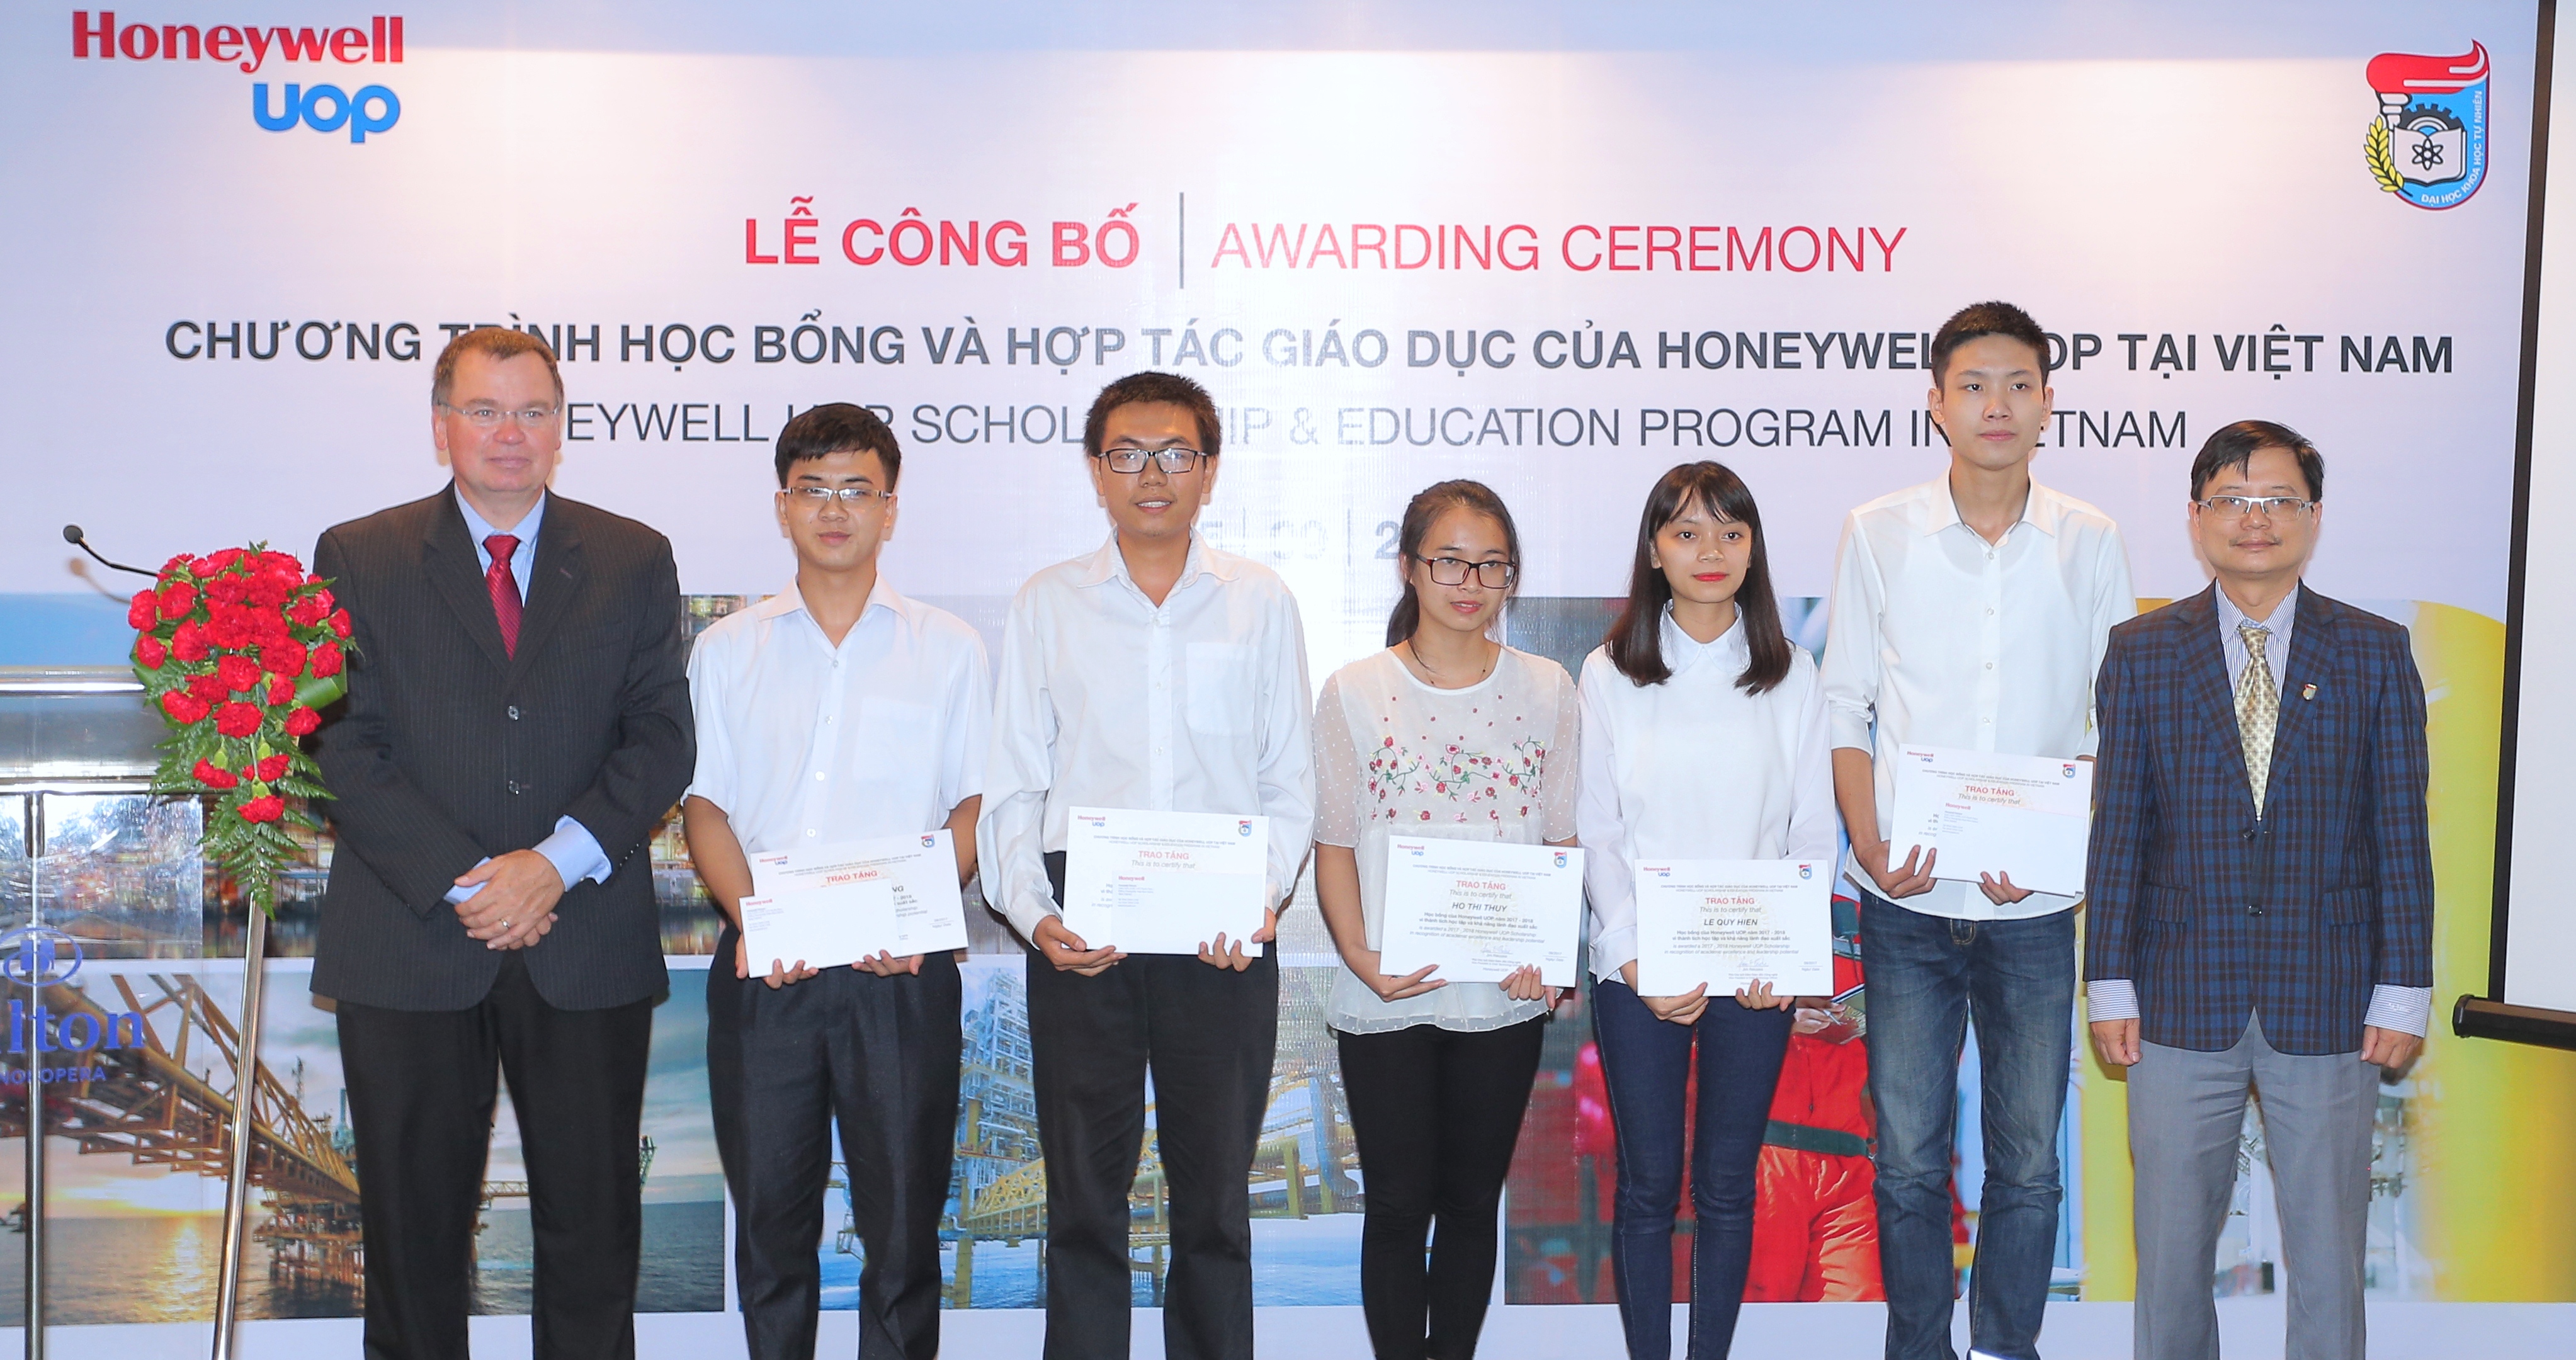 Honeywell awards 20 scholarships to chemical engineer students in Vietnam